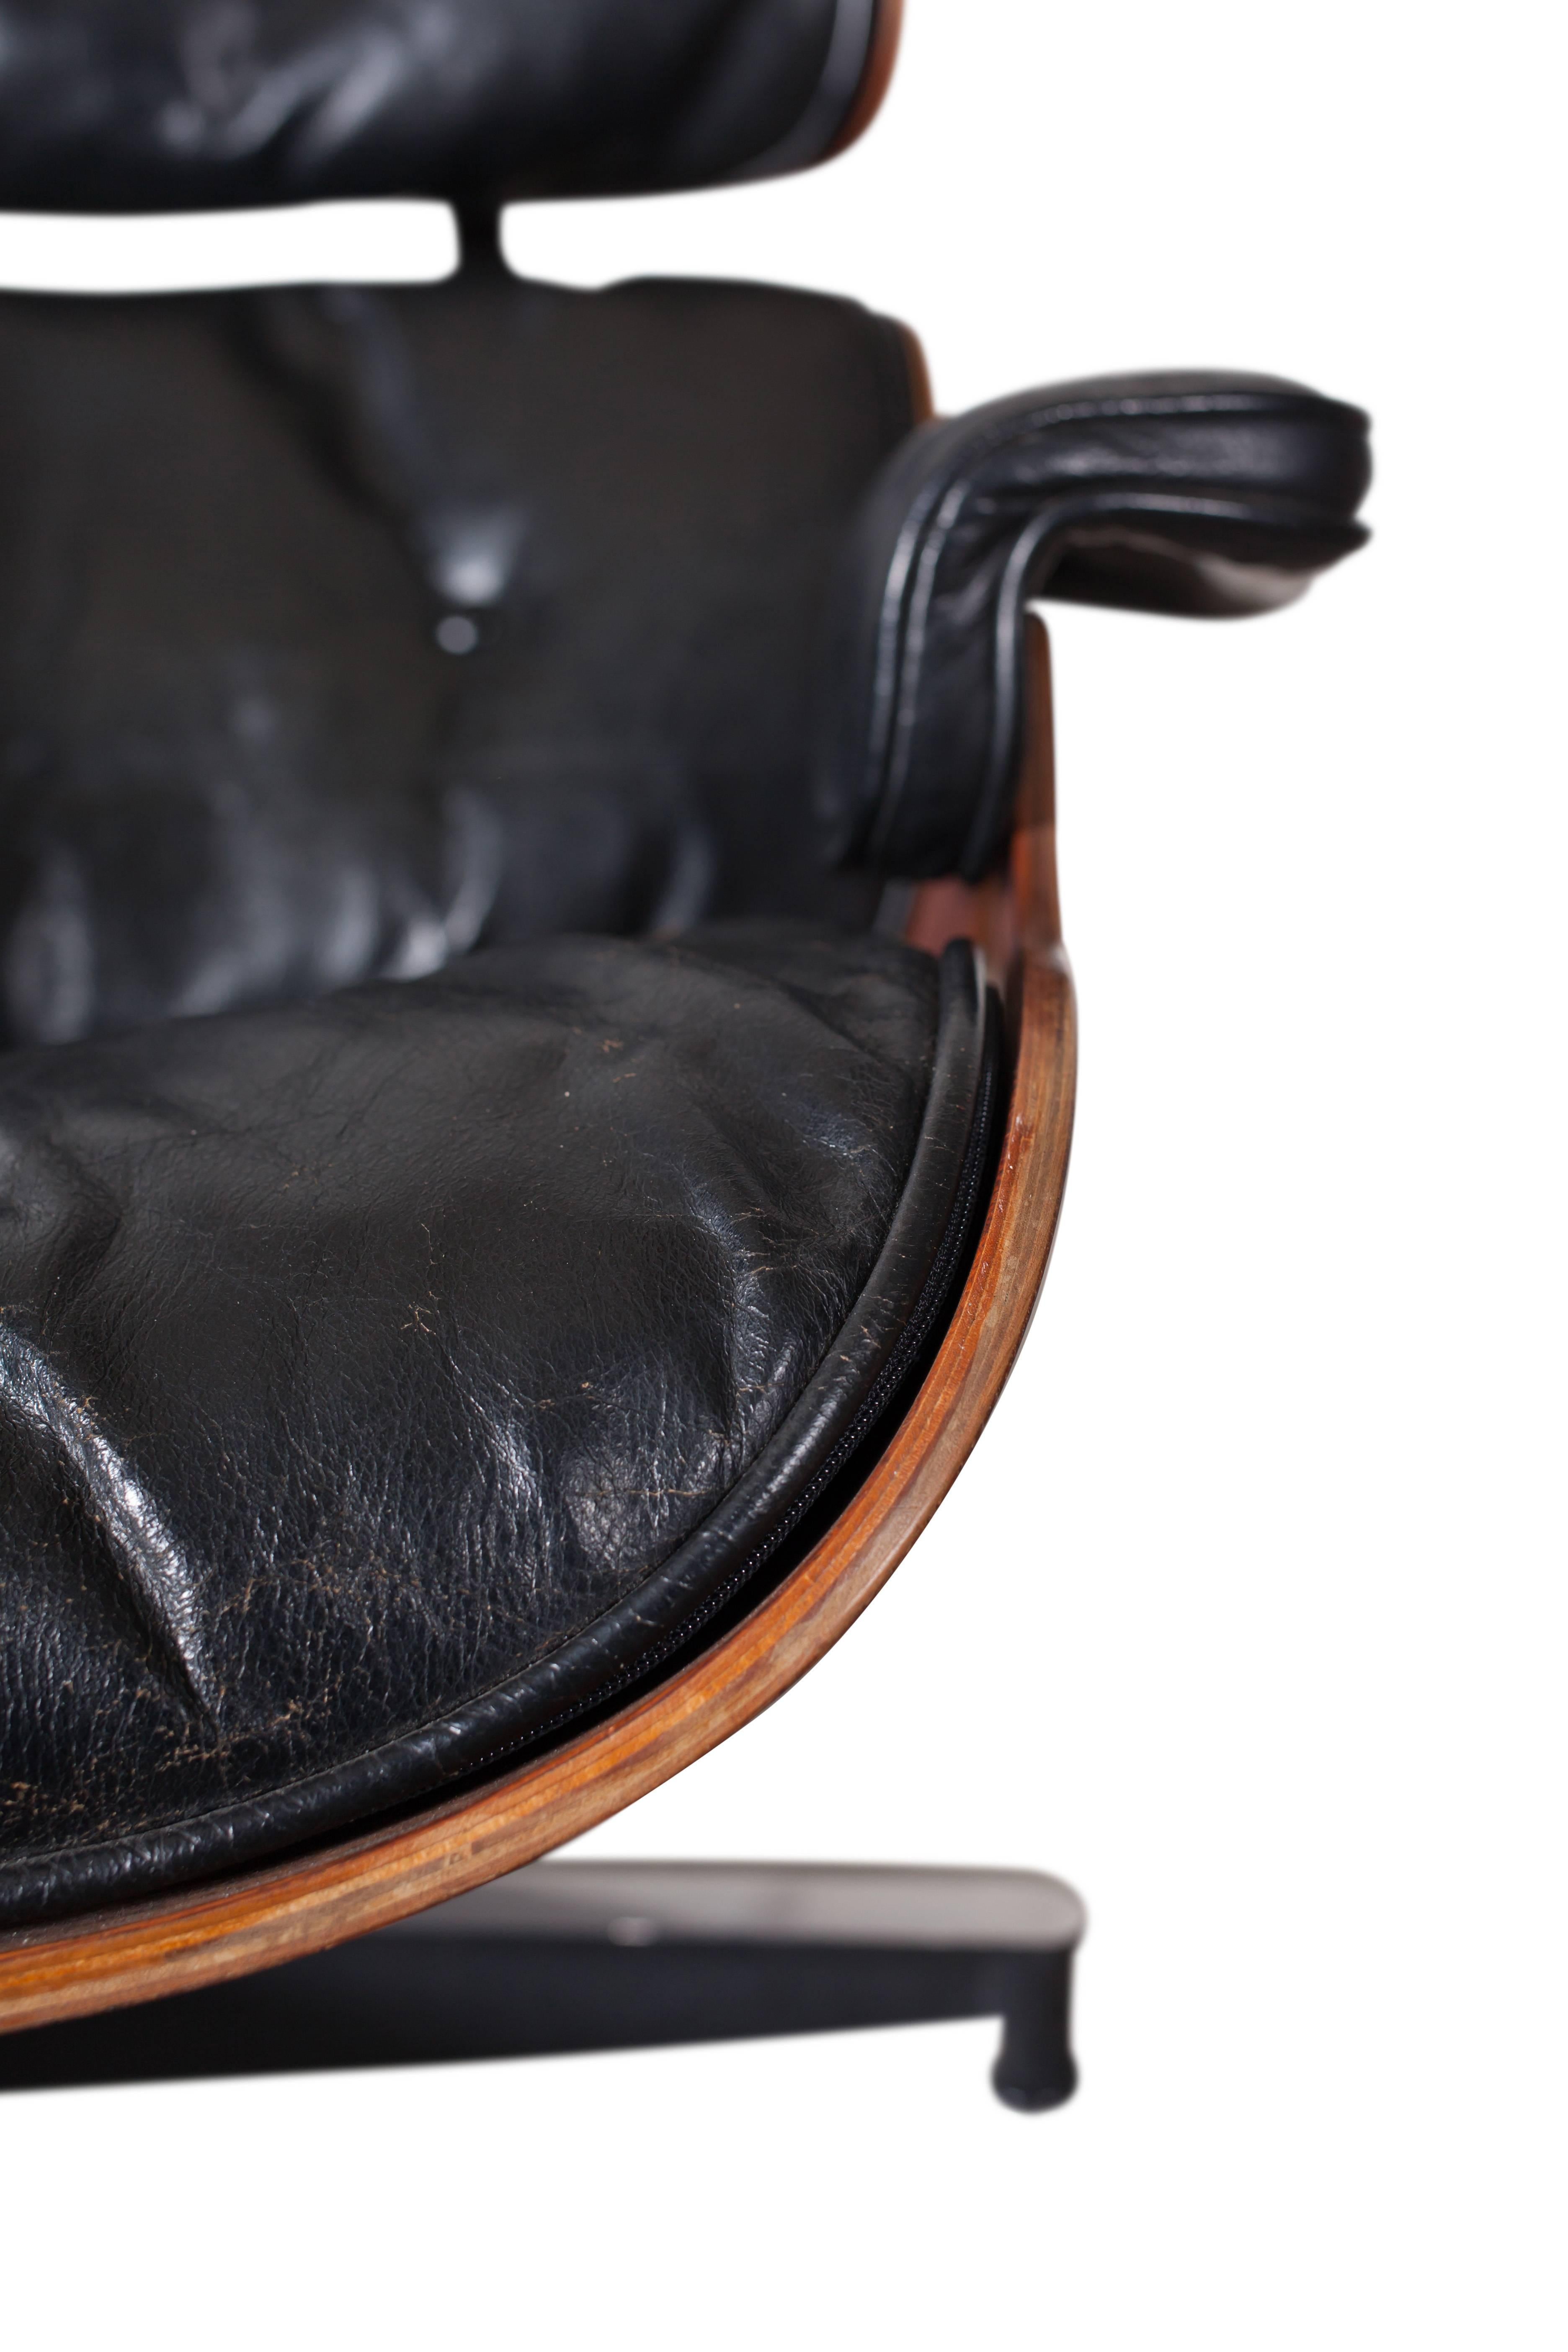 American Eames Lounge Chair & Ottoman - 1st Edition